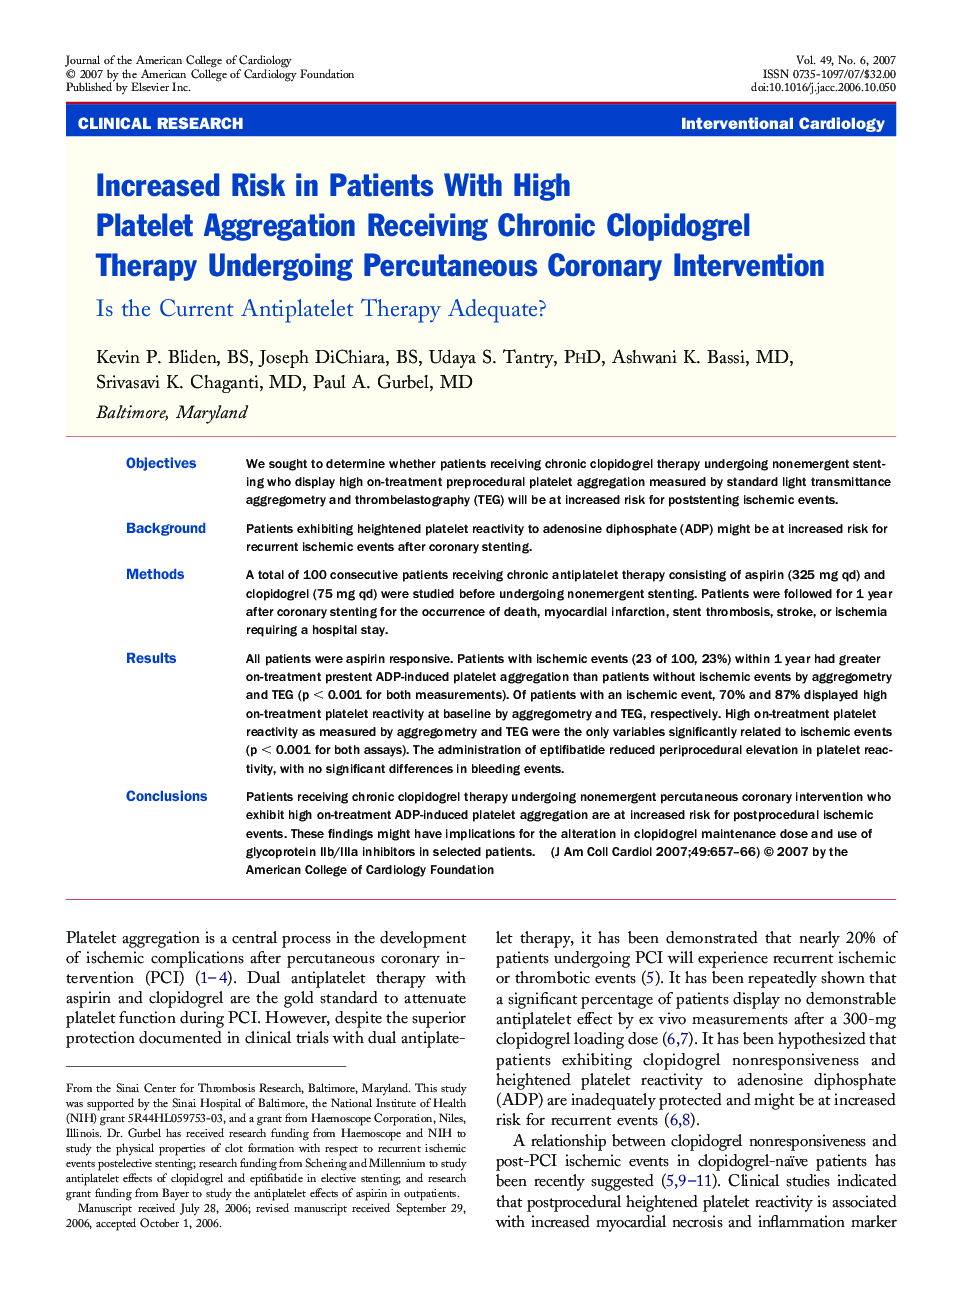 Increased Risk in Patients With High Platelet Aggregation Receiving Chronic Clopidogrel Therapy Undergoing Percutaneous Coronary Intervention : Is the Current Antiplatelet Therapy Adequate?